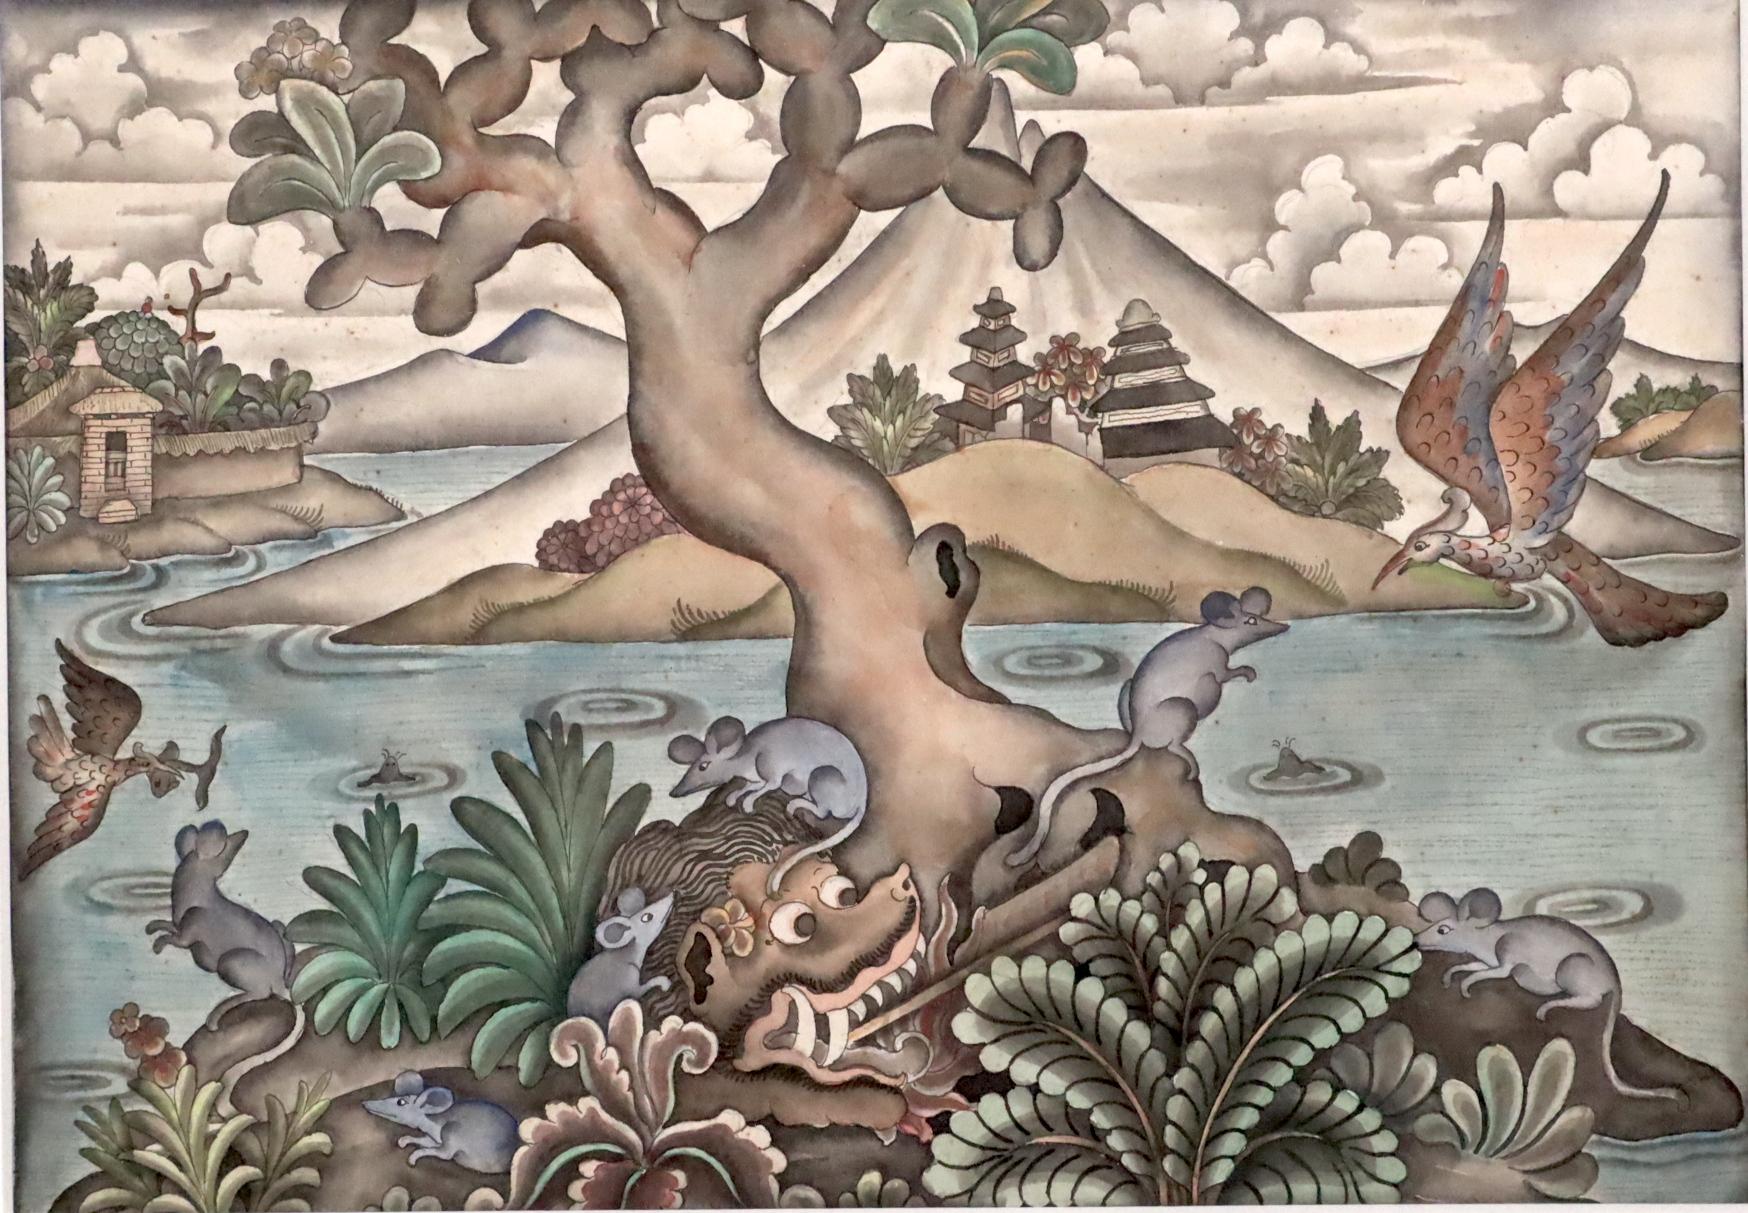 Balinese watercolor Mid-20th century Indonesian art INVENTORY CLEARANCE SALE - Art by Unknown